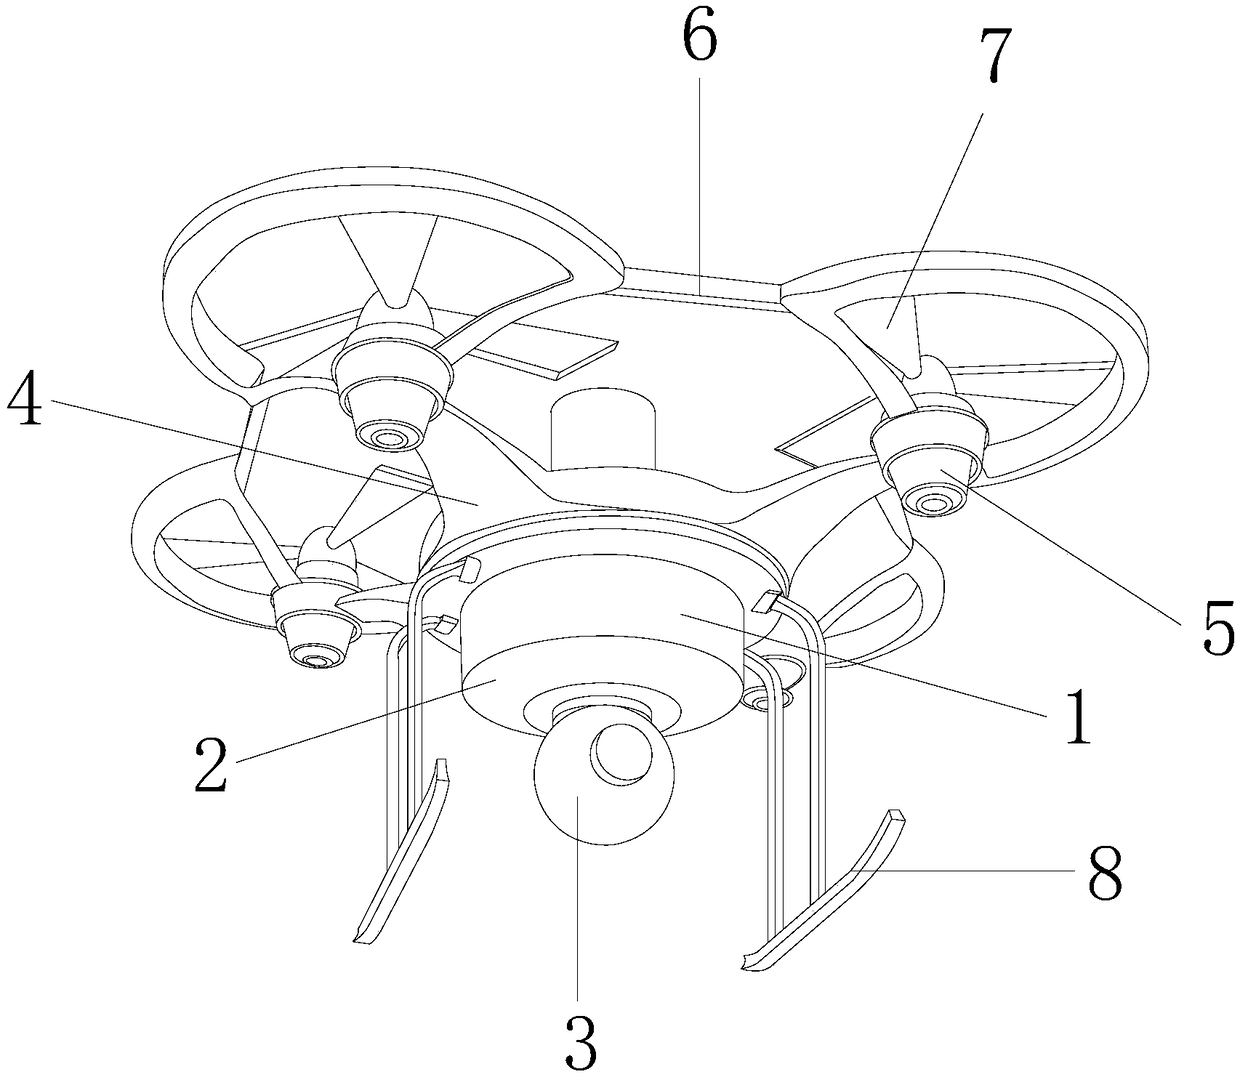 Unmanned aerial vehicle with retractable comprehensive protection device